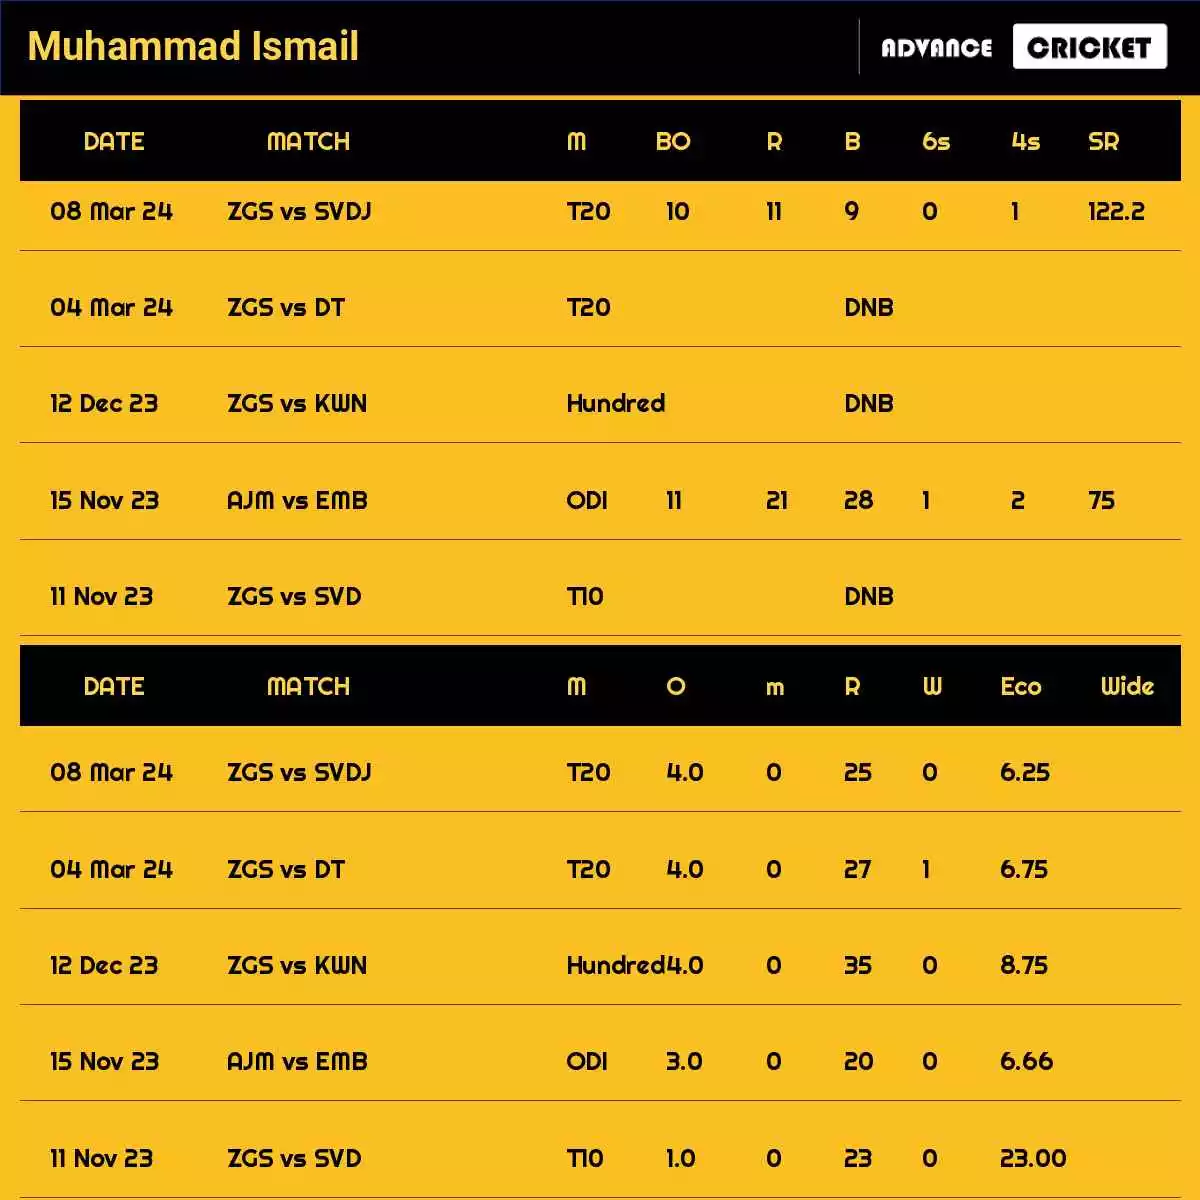 Muhammad Ismail Recent Matches Details Date Wise